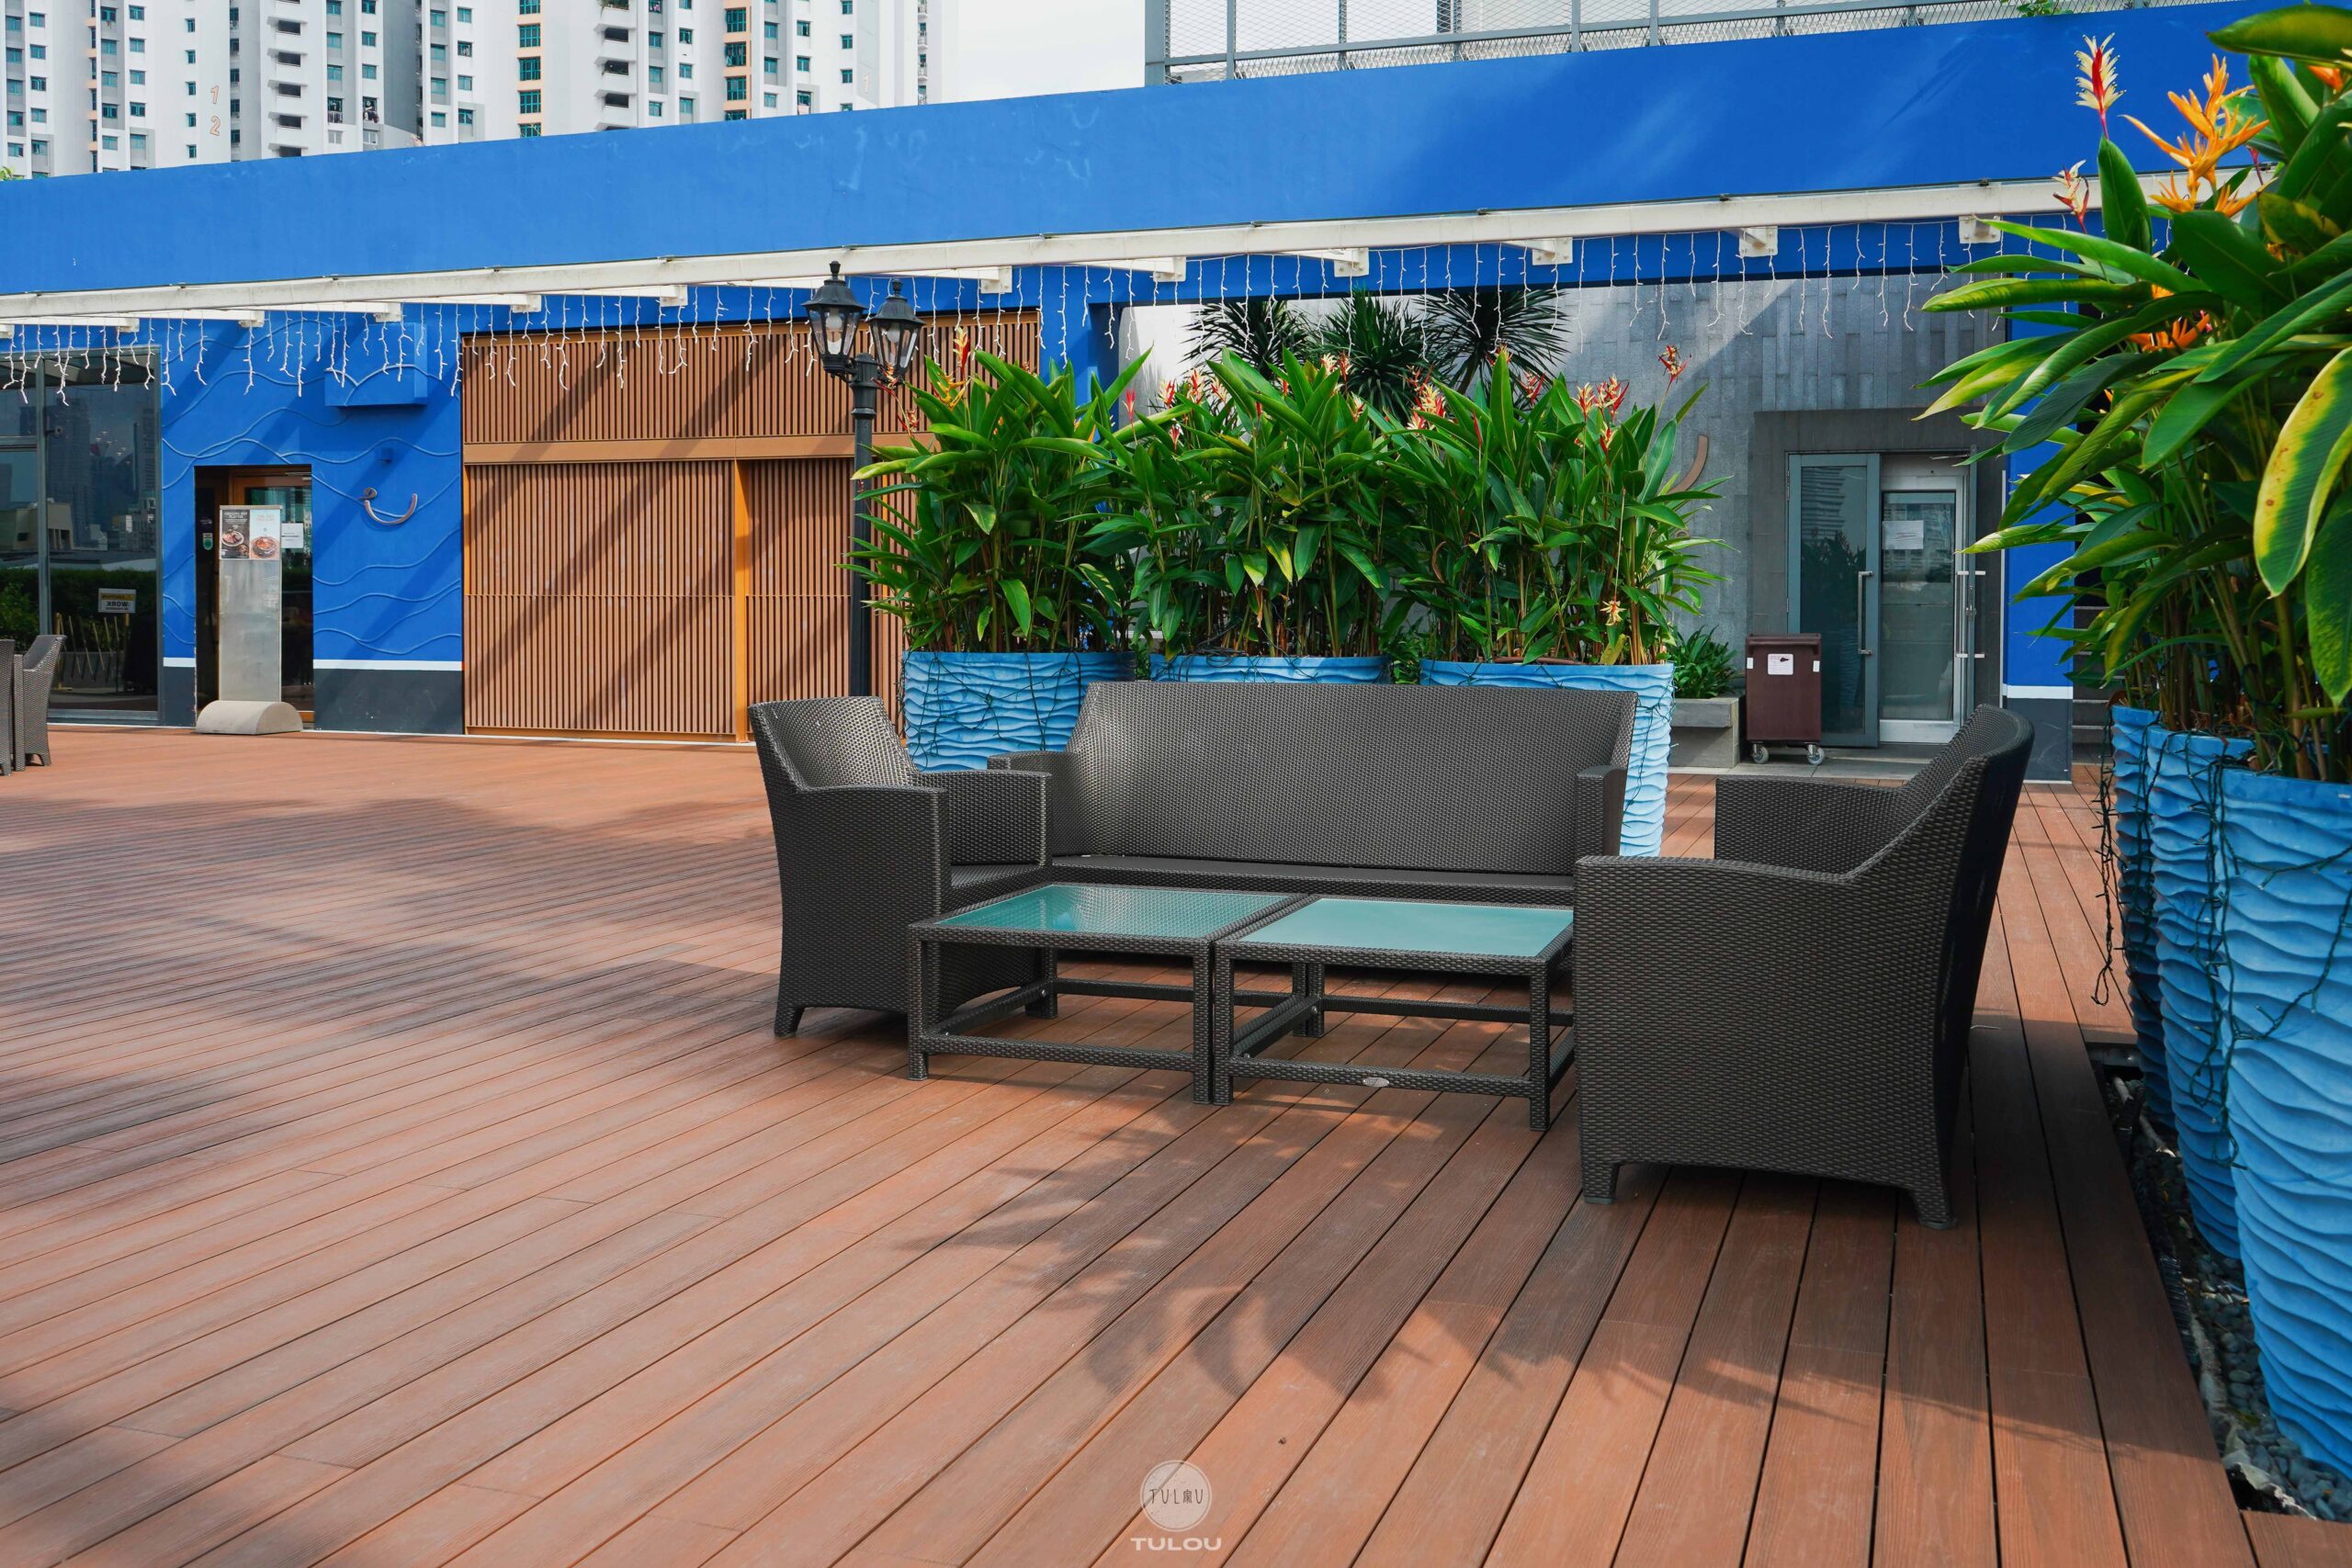 One Farrer Hotel Tulou Composite Timber Decking Singapore 5 scaled - One Farrer Hotel